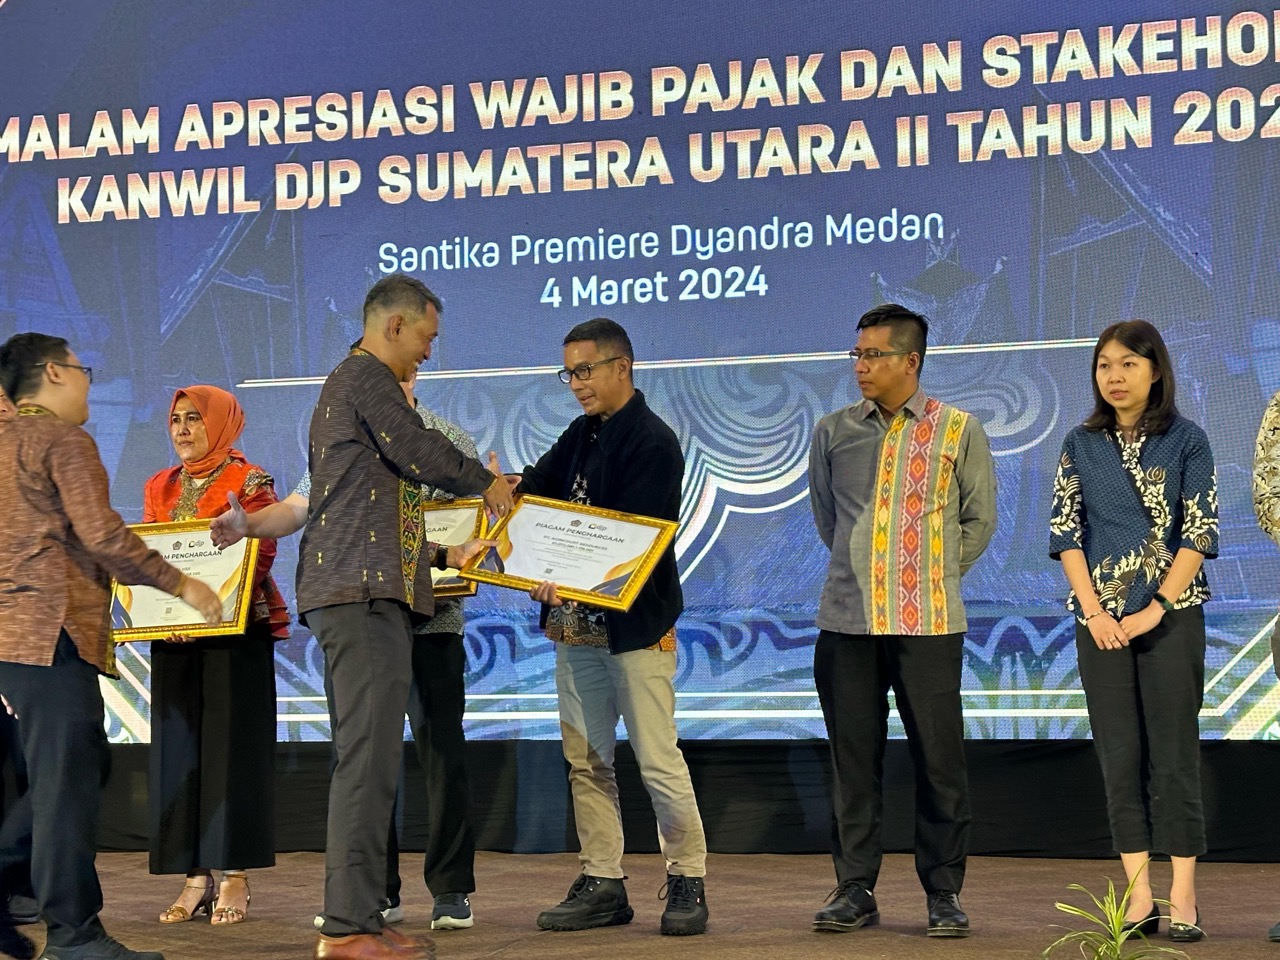 Agincourt Resources has been honored with the Taxpayer Award 2023, presented by the Regional Office (Kanwil) of the Directorate General of Taxes (DJP) Sumatra II.